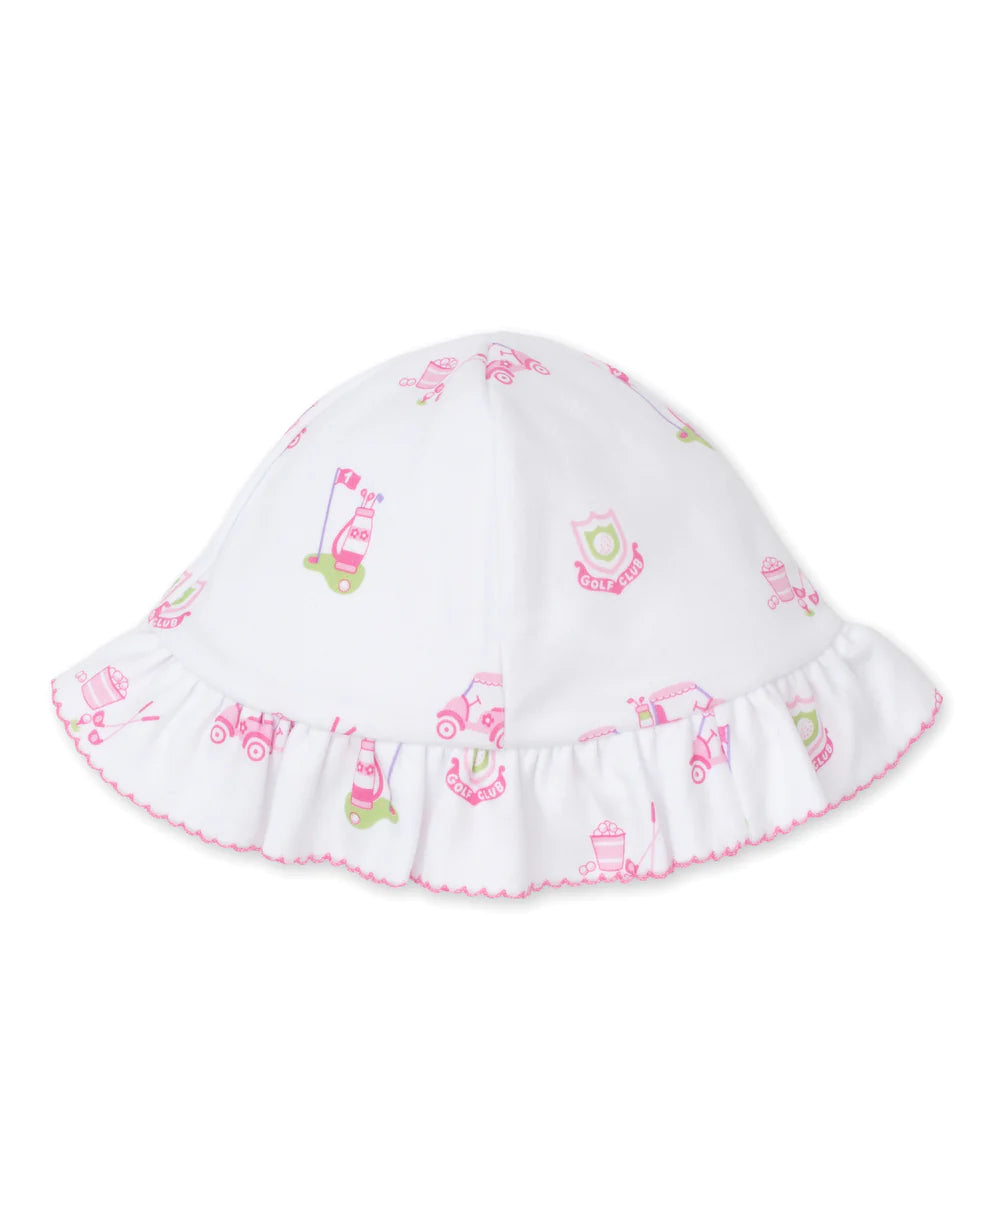 Hole In One Floppy Hat, Pink